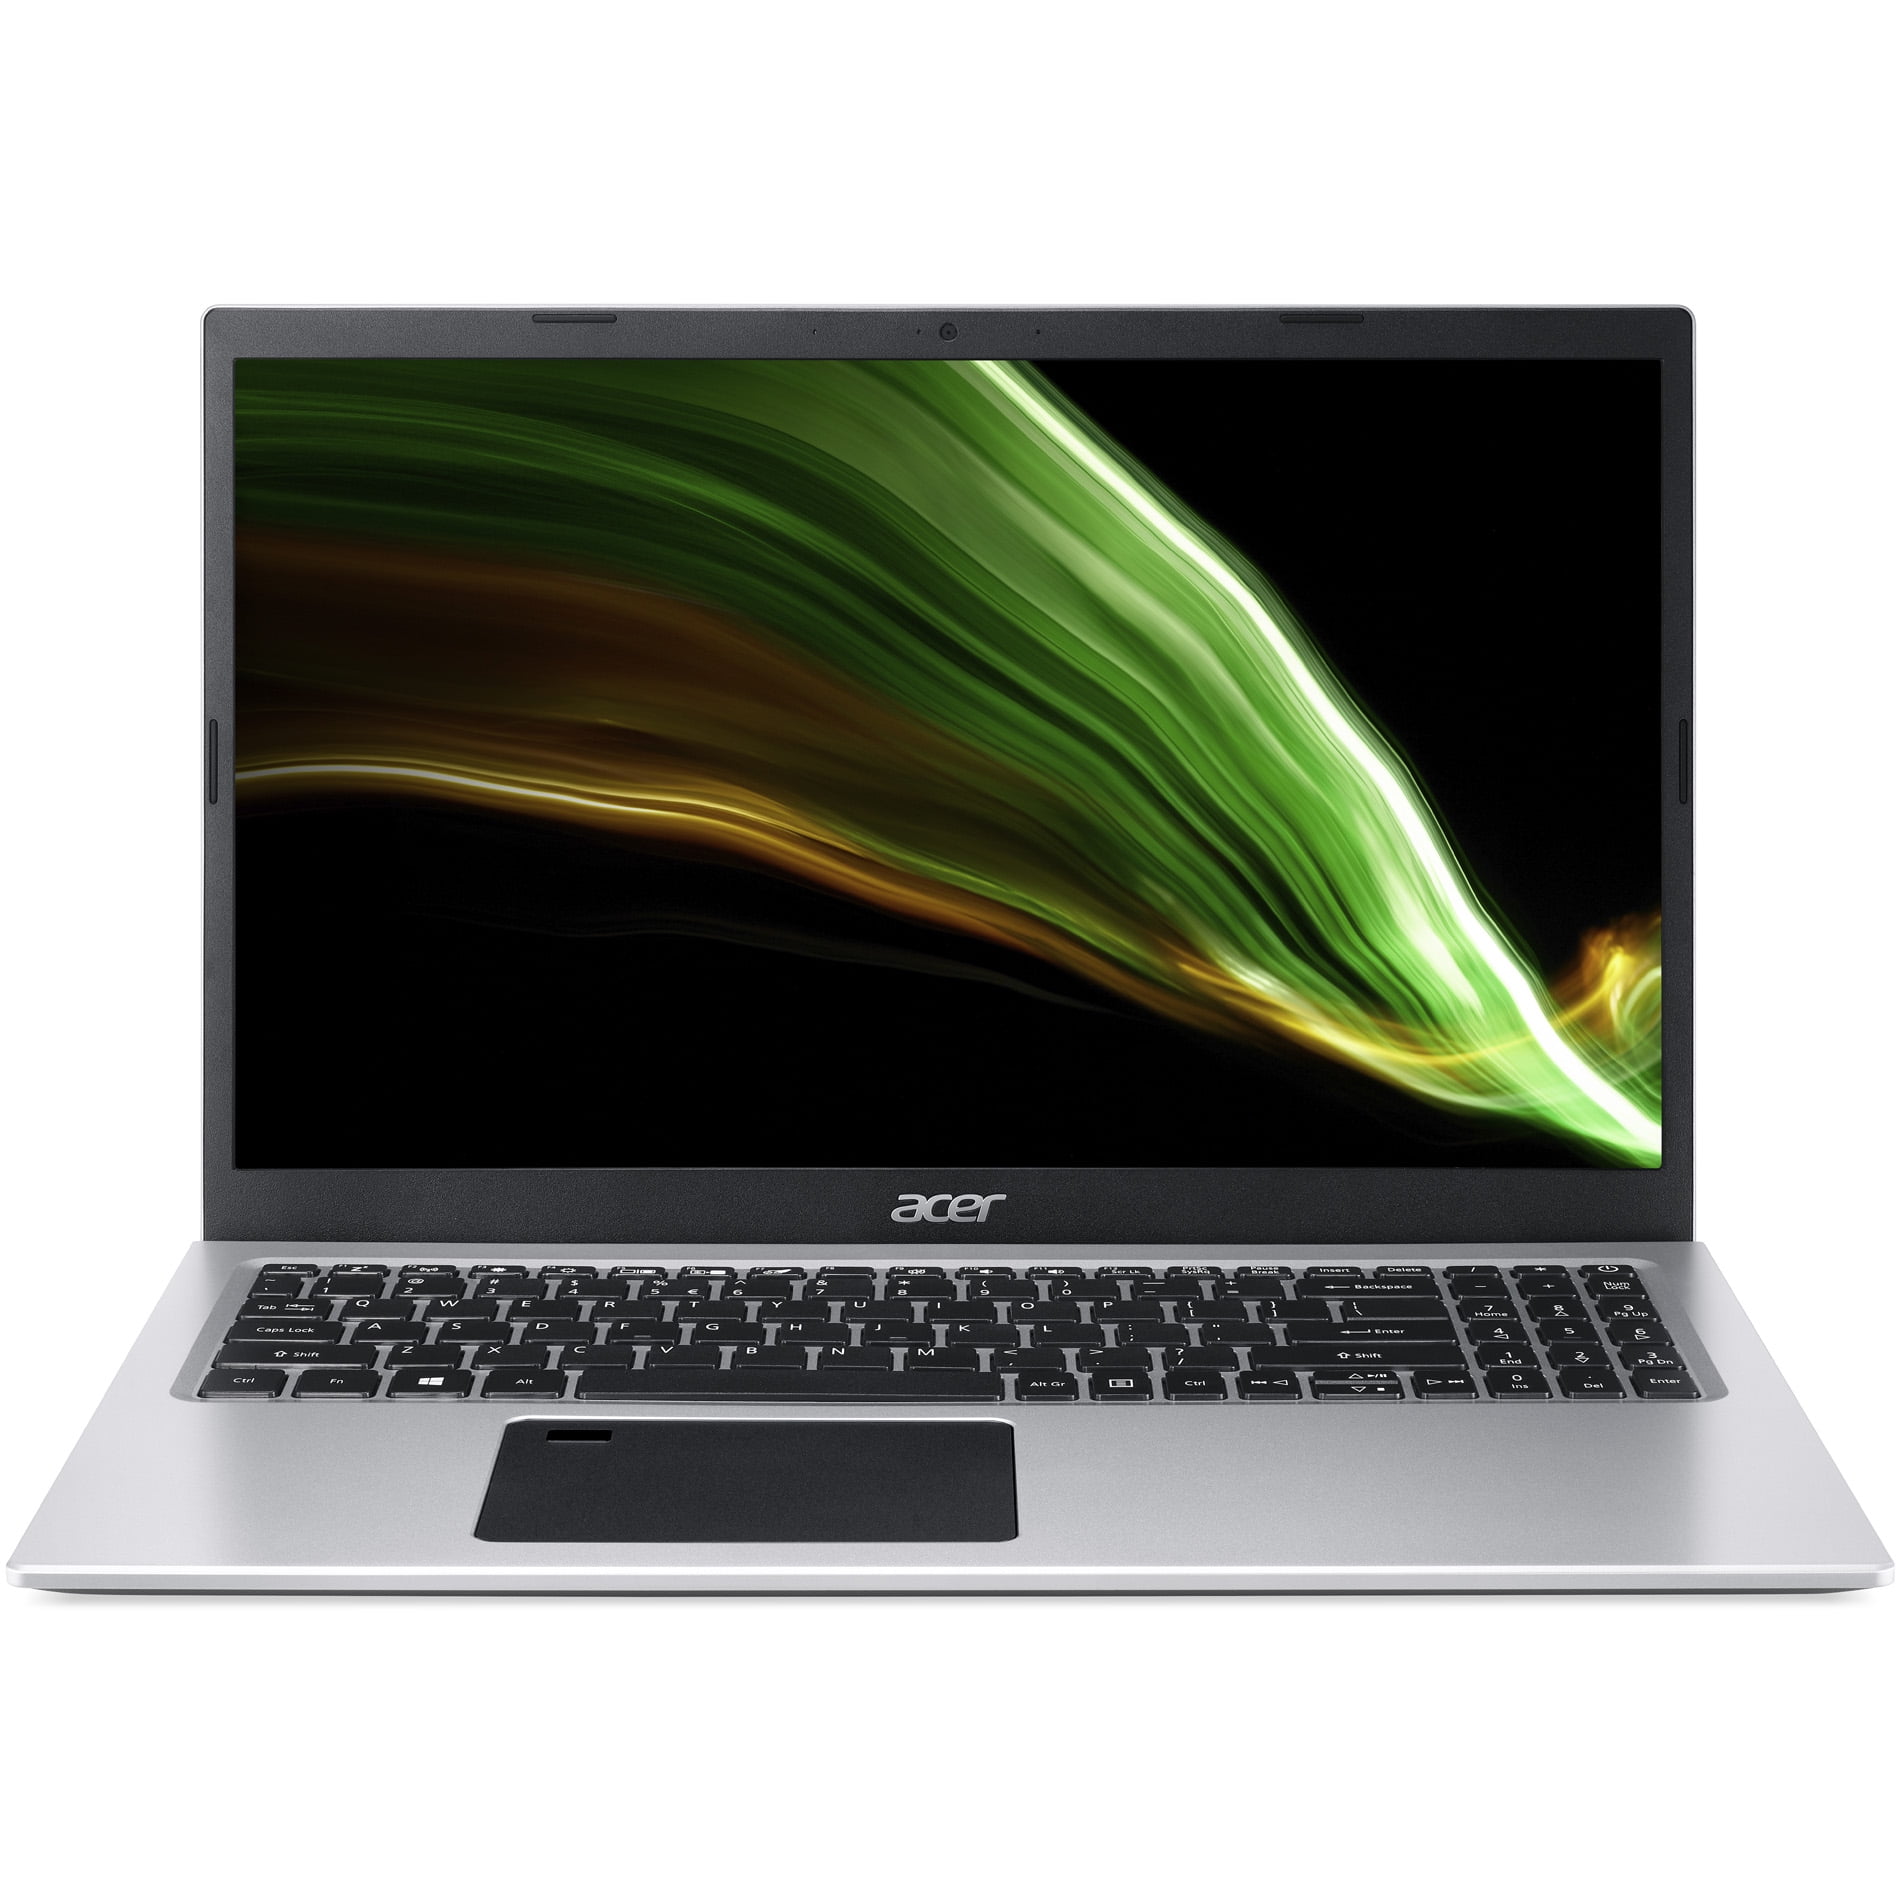 Acer Extensa 15 Intel core i3-N305 - Complete Review With